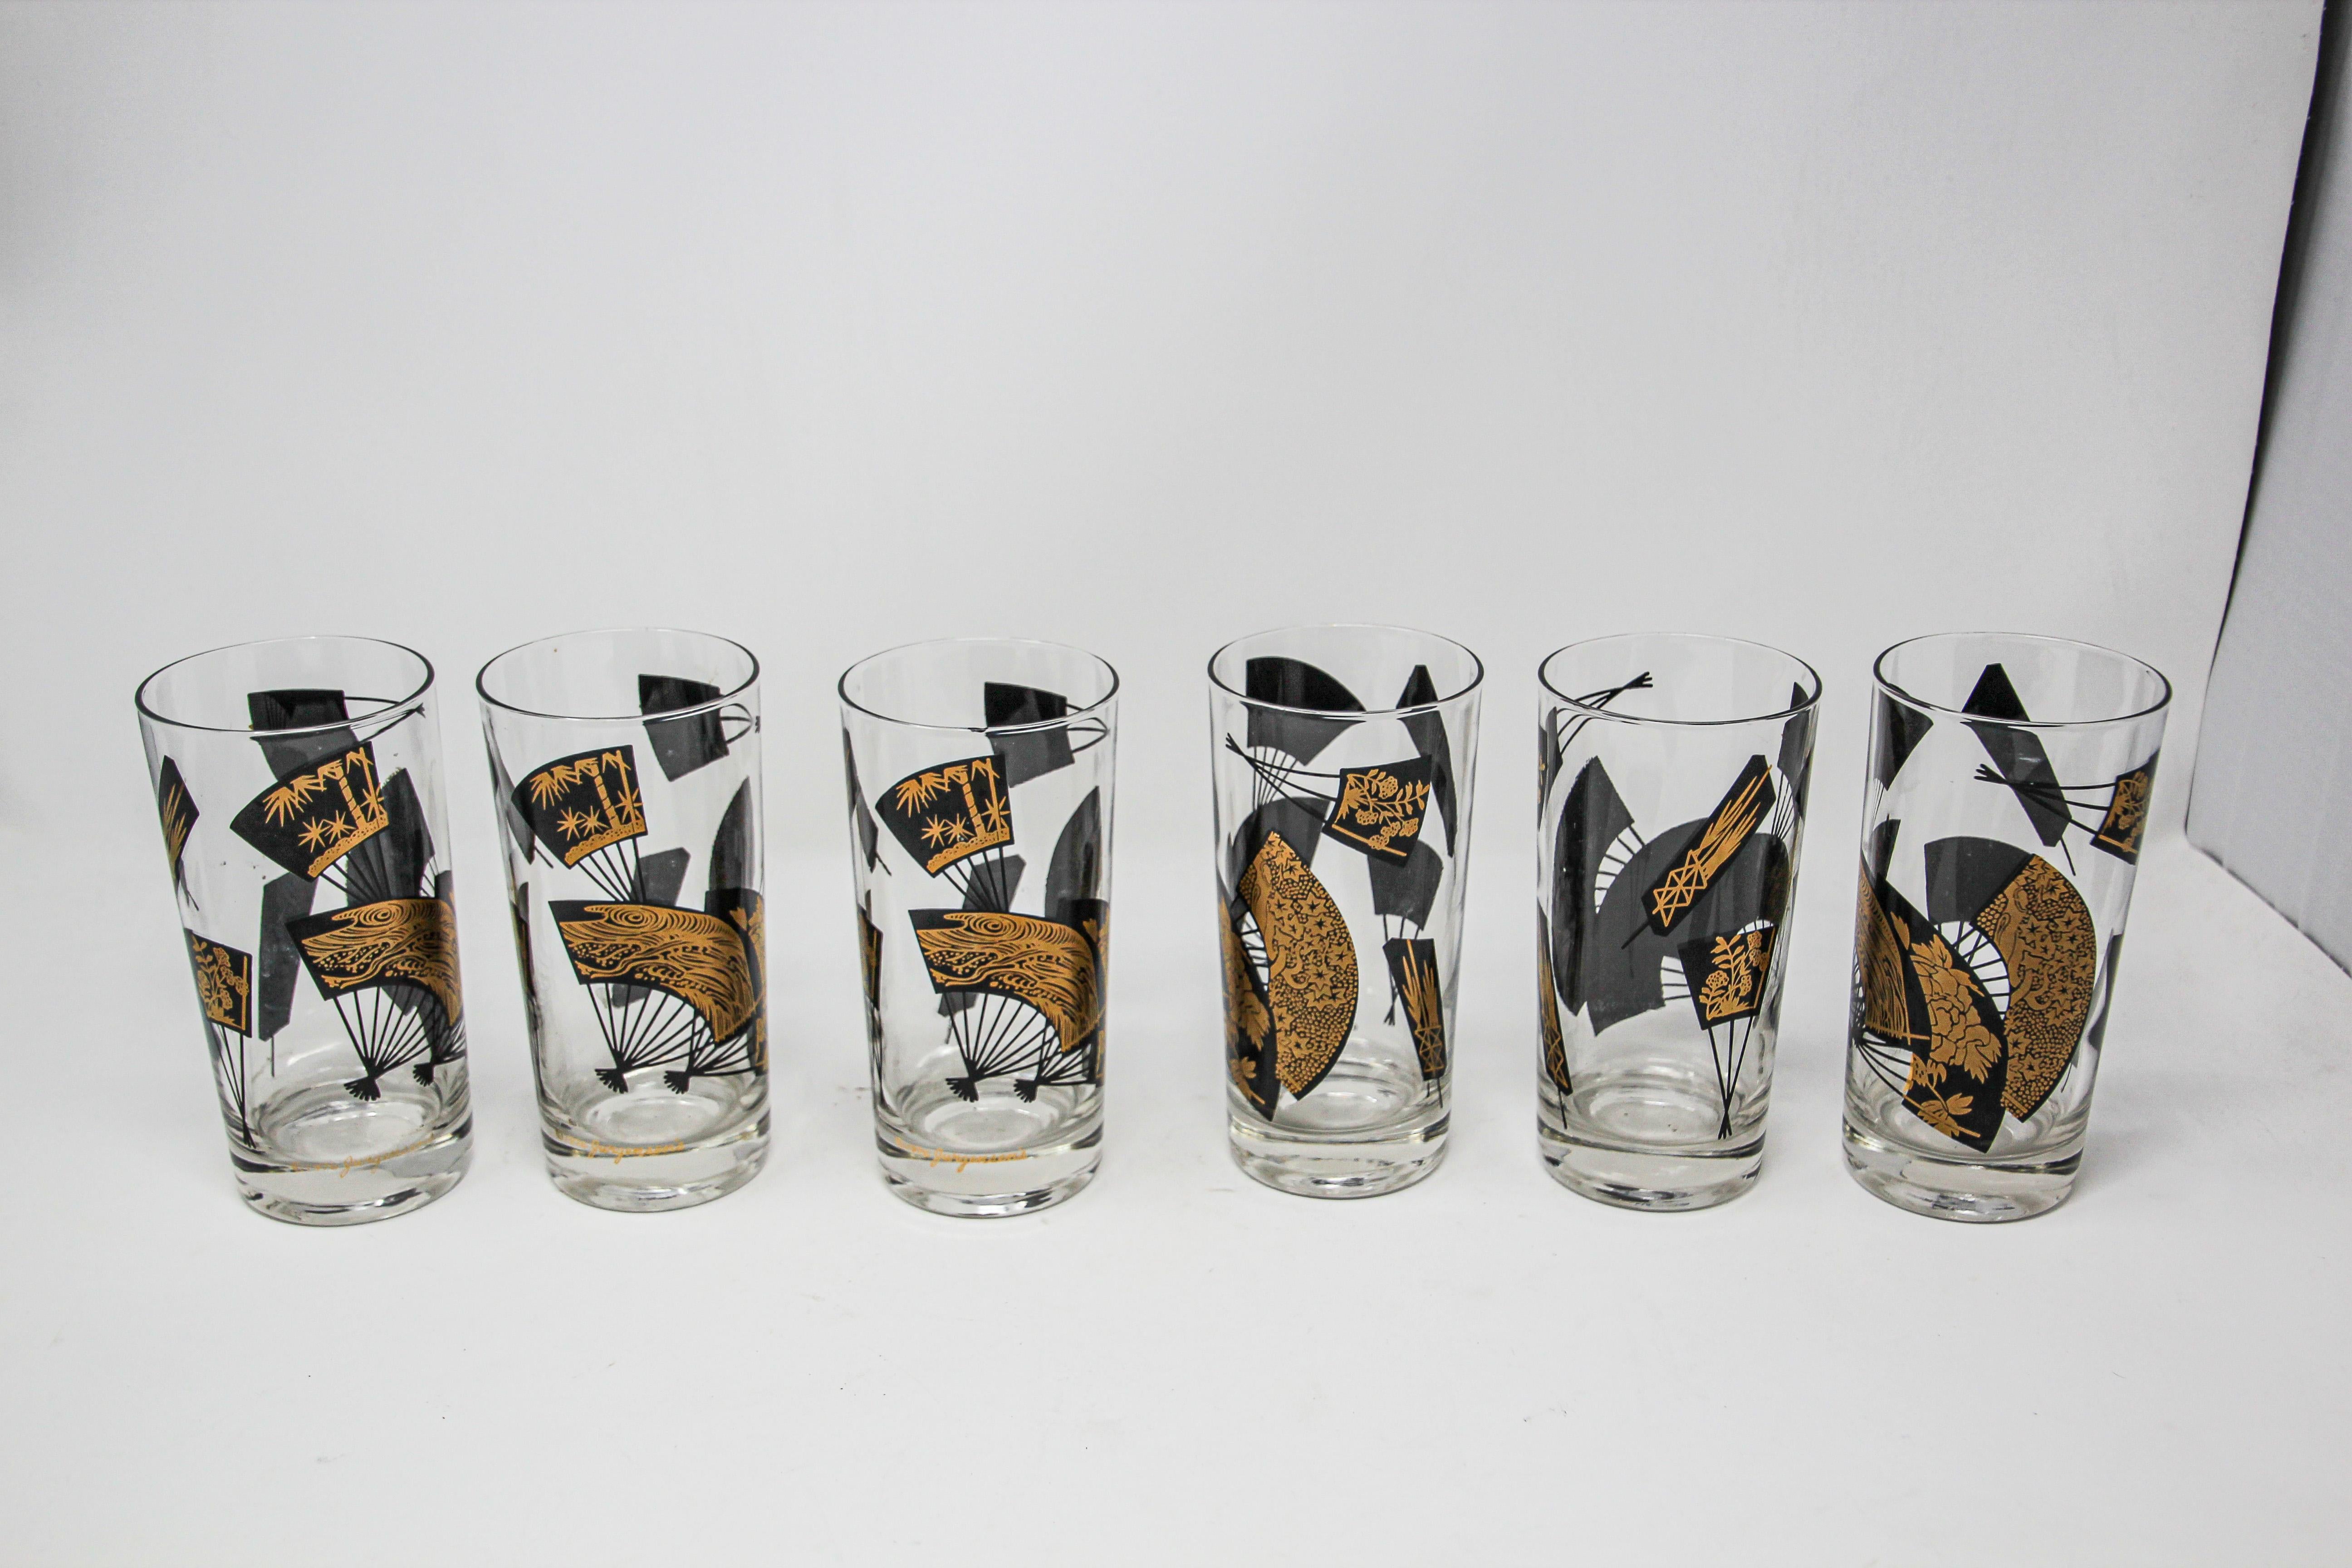 1976 Collectible Highball Tumbler Glasses Black and Gold by Gurgensen's Set of 6.
Elegant exquisite vintage Asian Theme set of six highball gilt glasses designed by Gurgensen's, circa 1976.
Hollywood Regency Collectible Barware glasses decorated